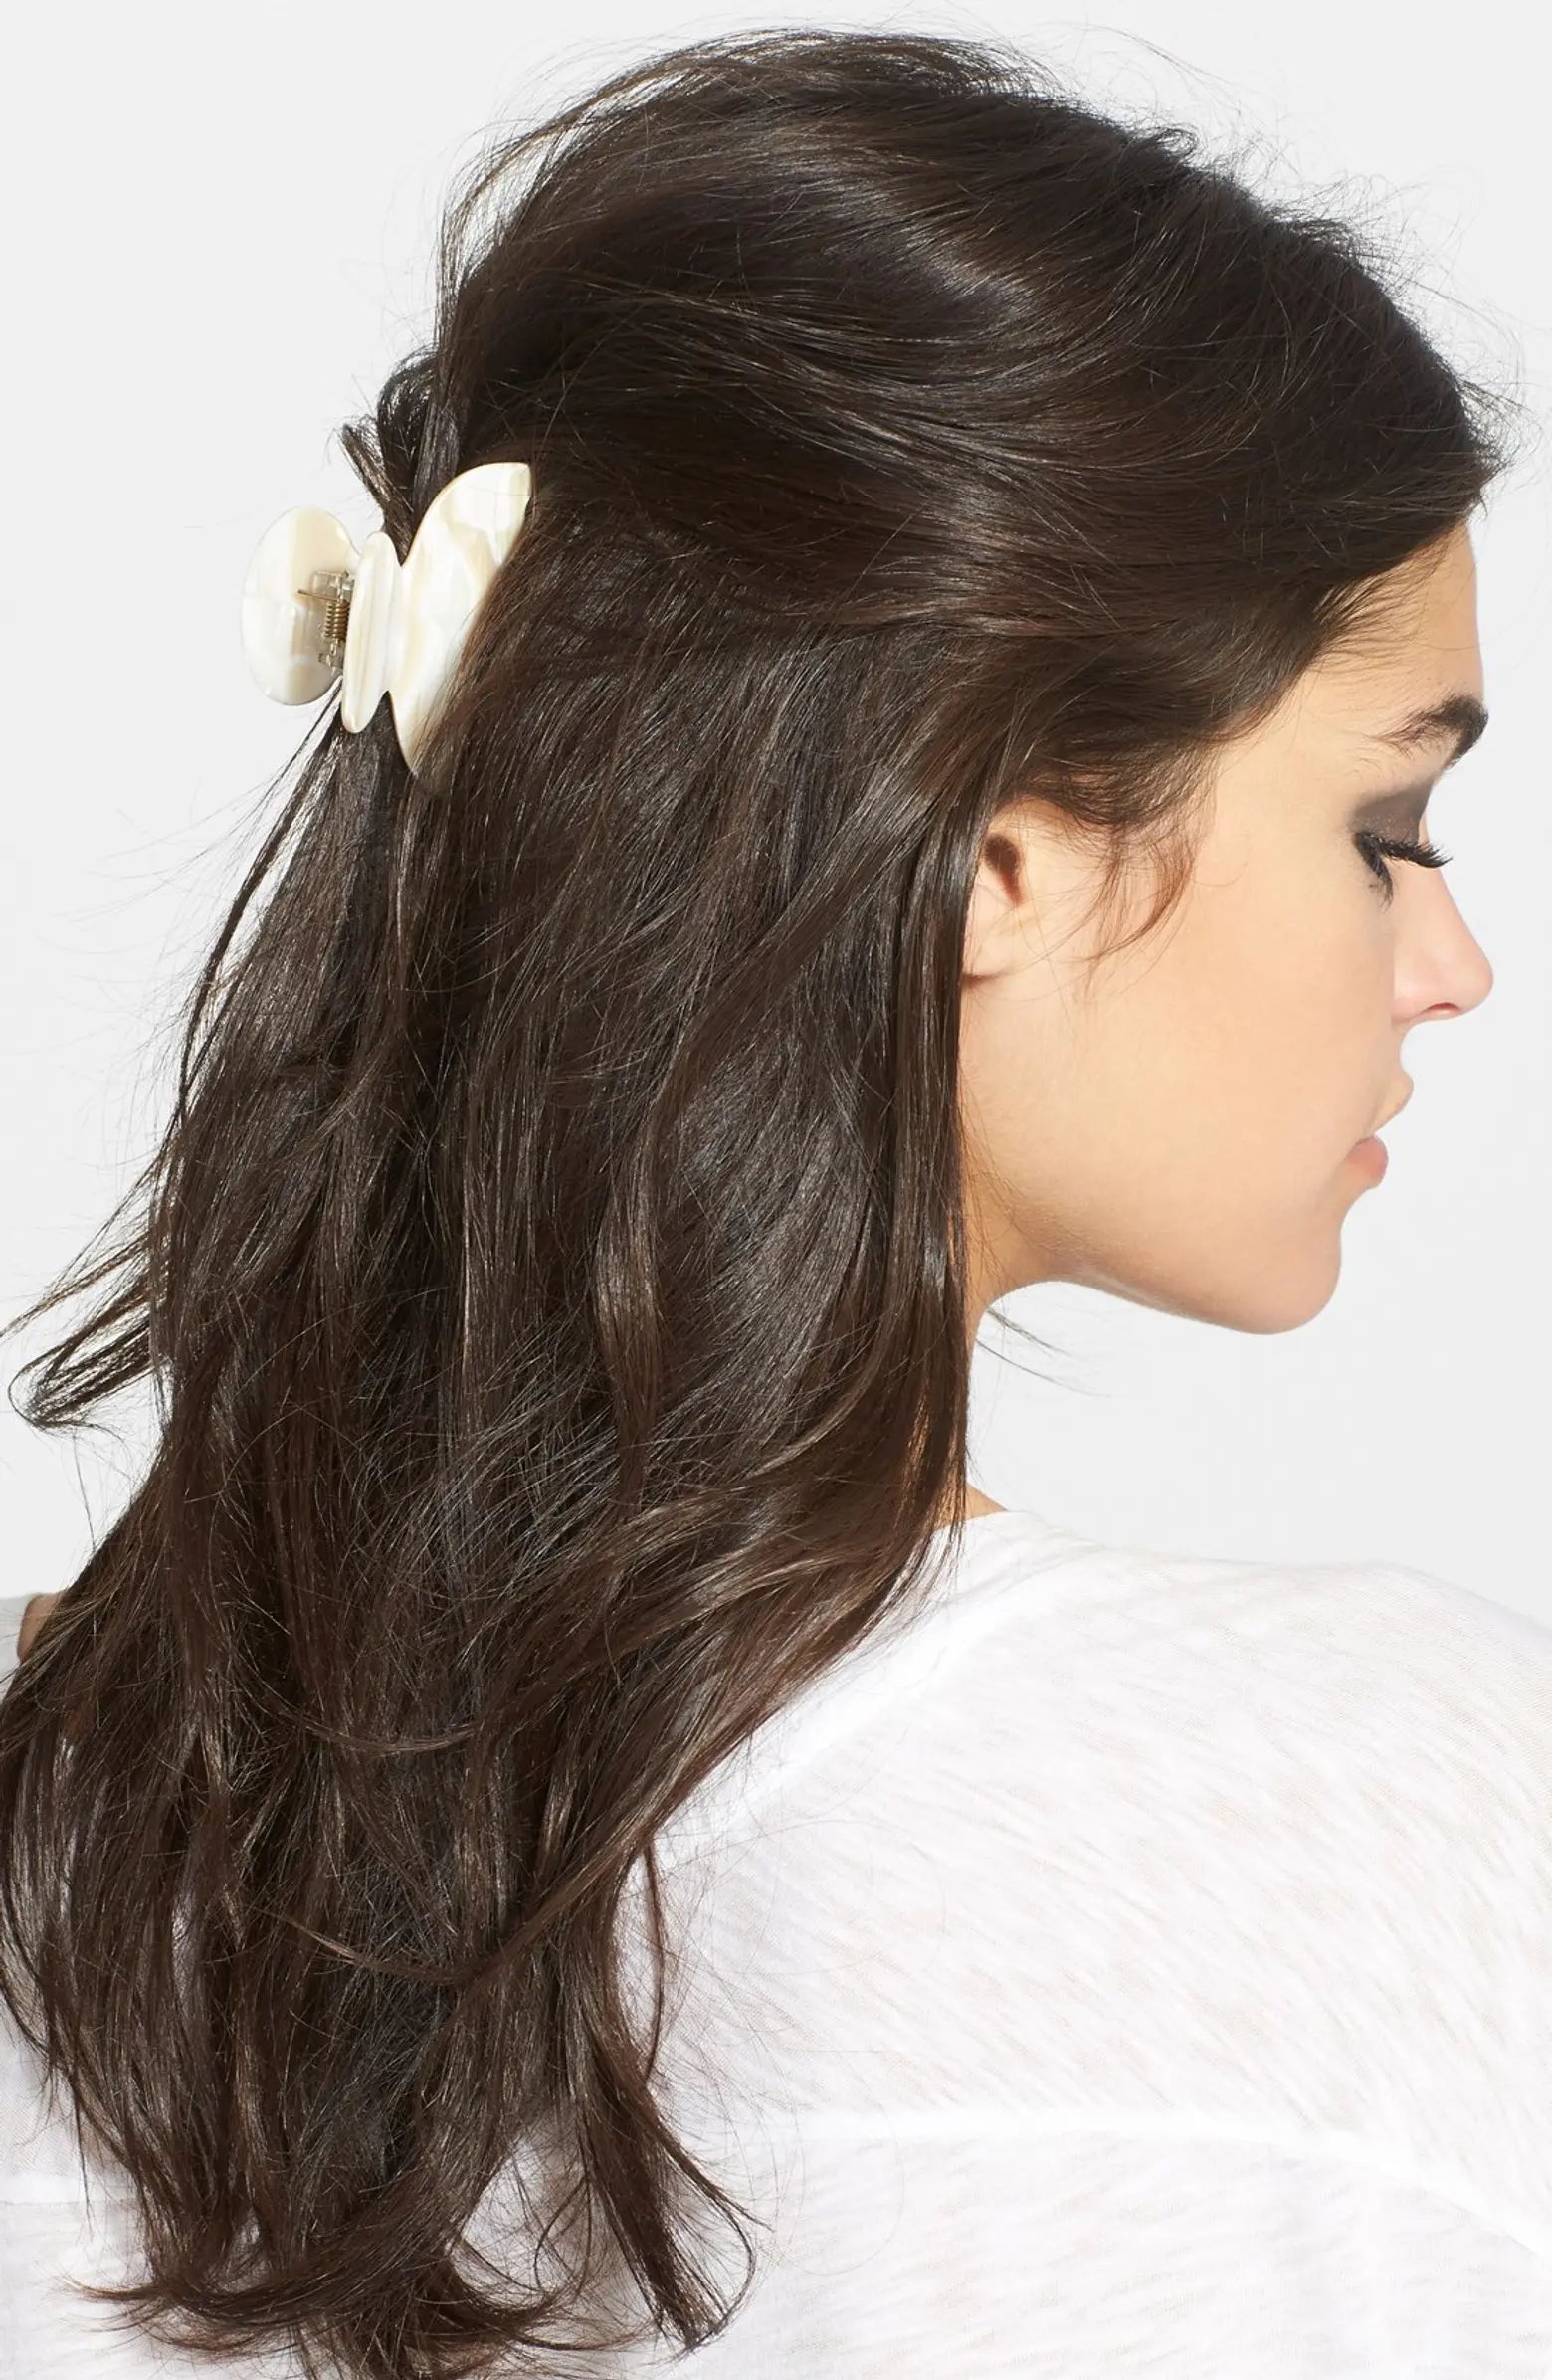 Small Couture Jaw Clip | Nordstrom